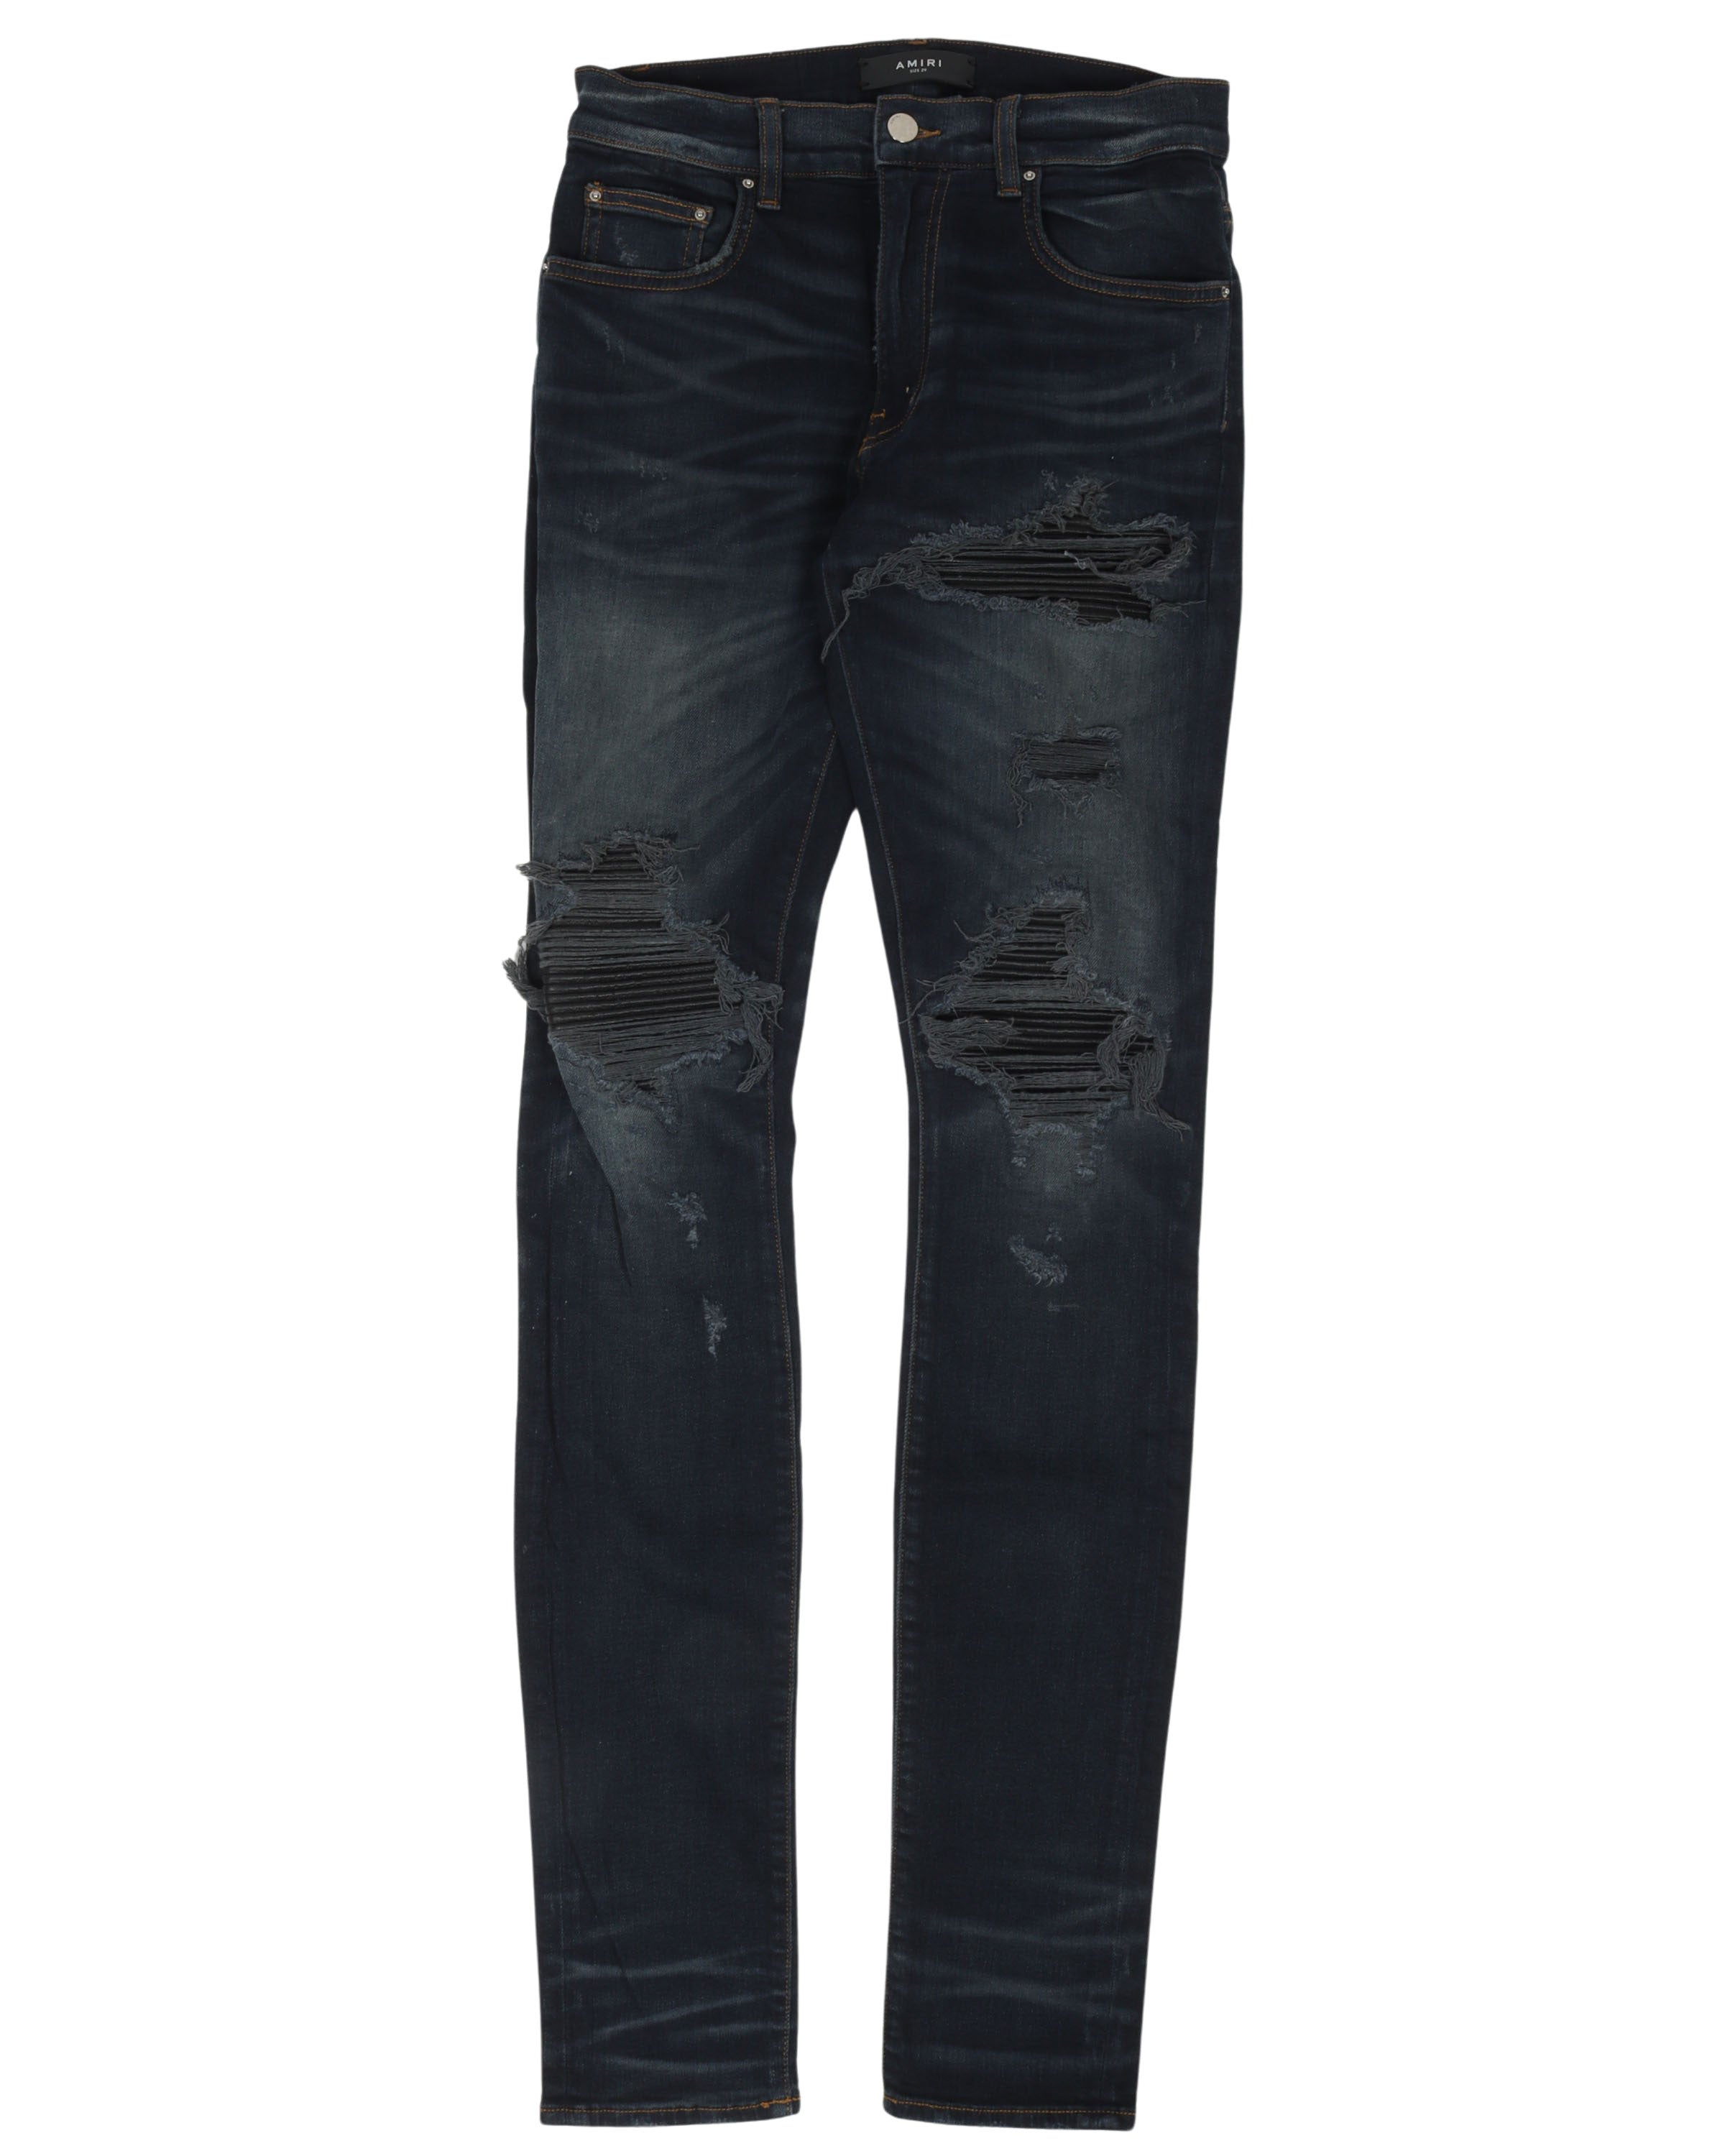 Knee Rip Patched Jeans